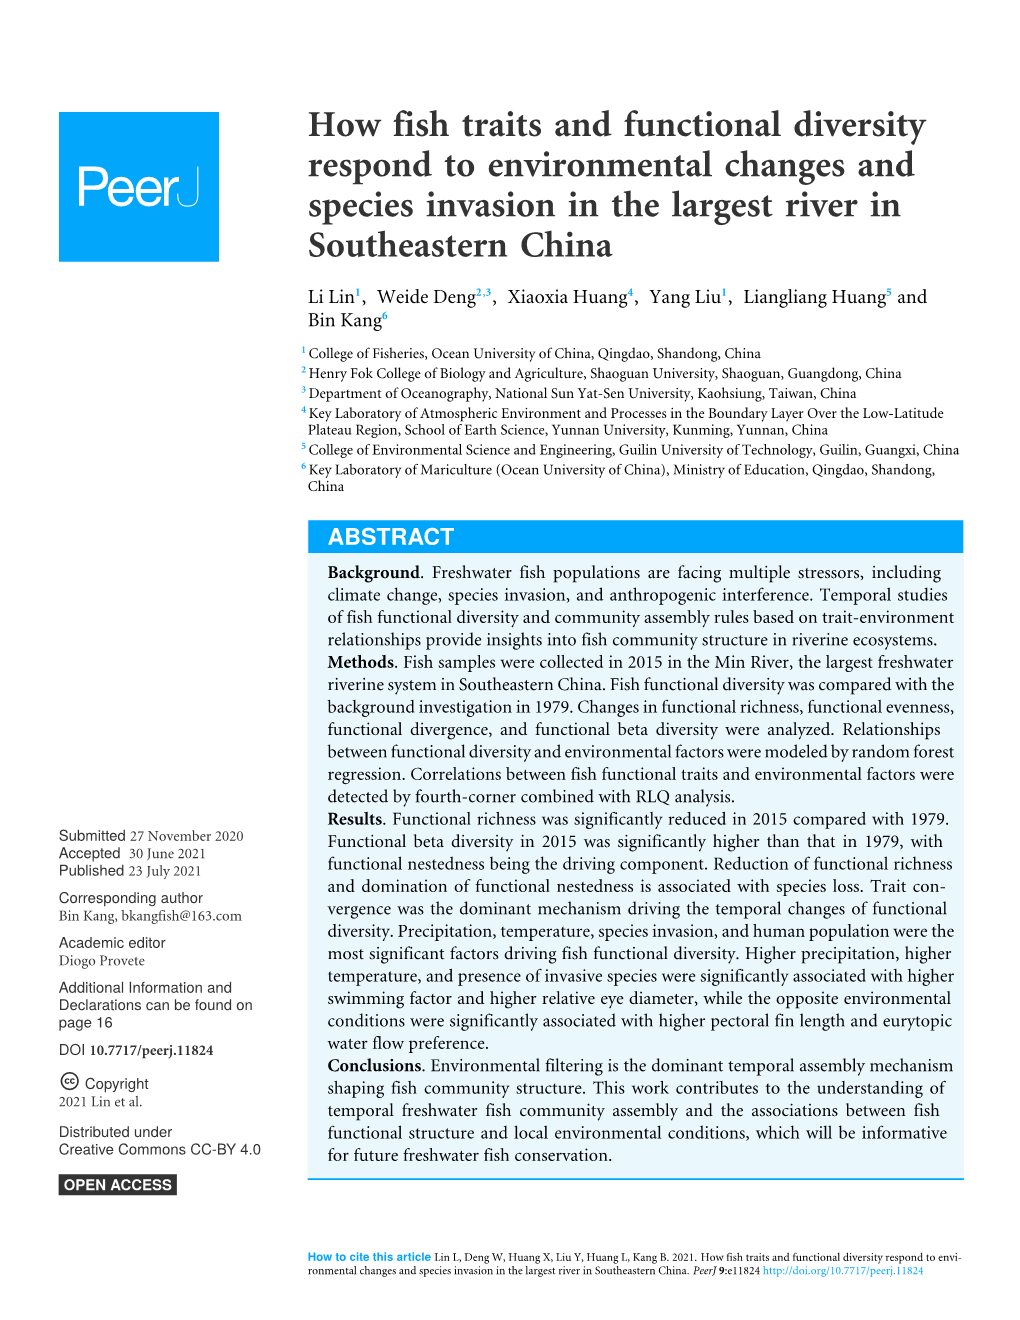 How Fish Traits and Functional Diversity Respond to Environmental Changes and Species Invasion in the Largest River in Southeastern China